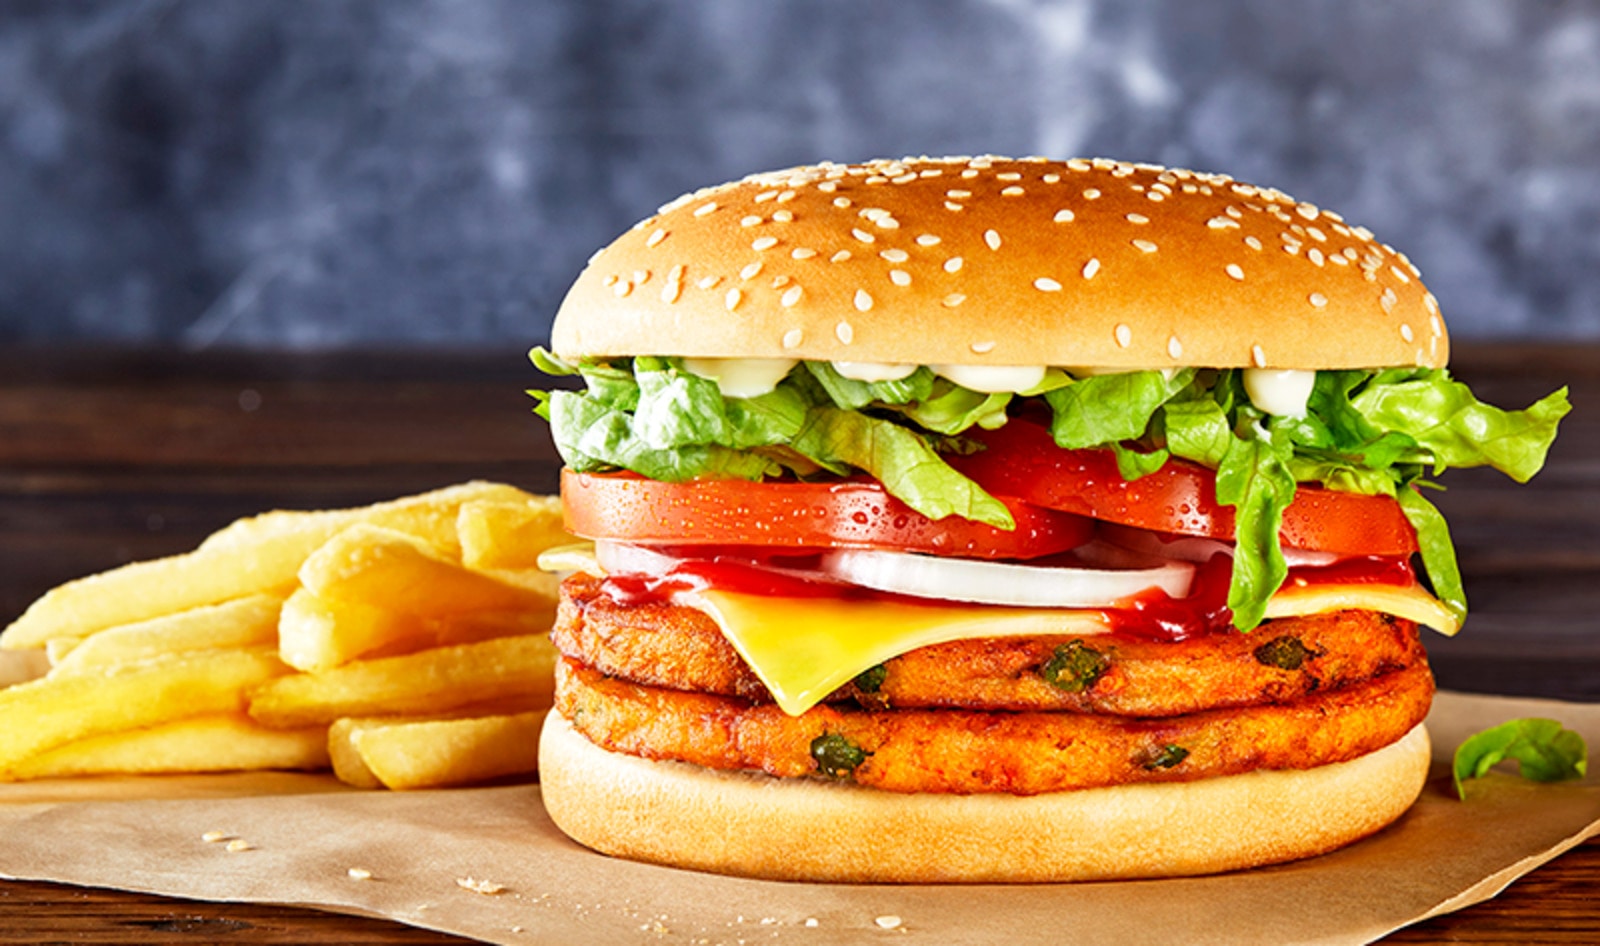 Aussie Equivalent of Burger King Invests $1 Million to Develop Vegan Whopper